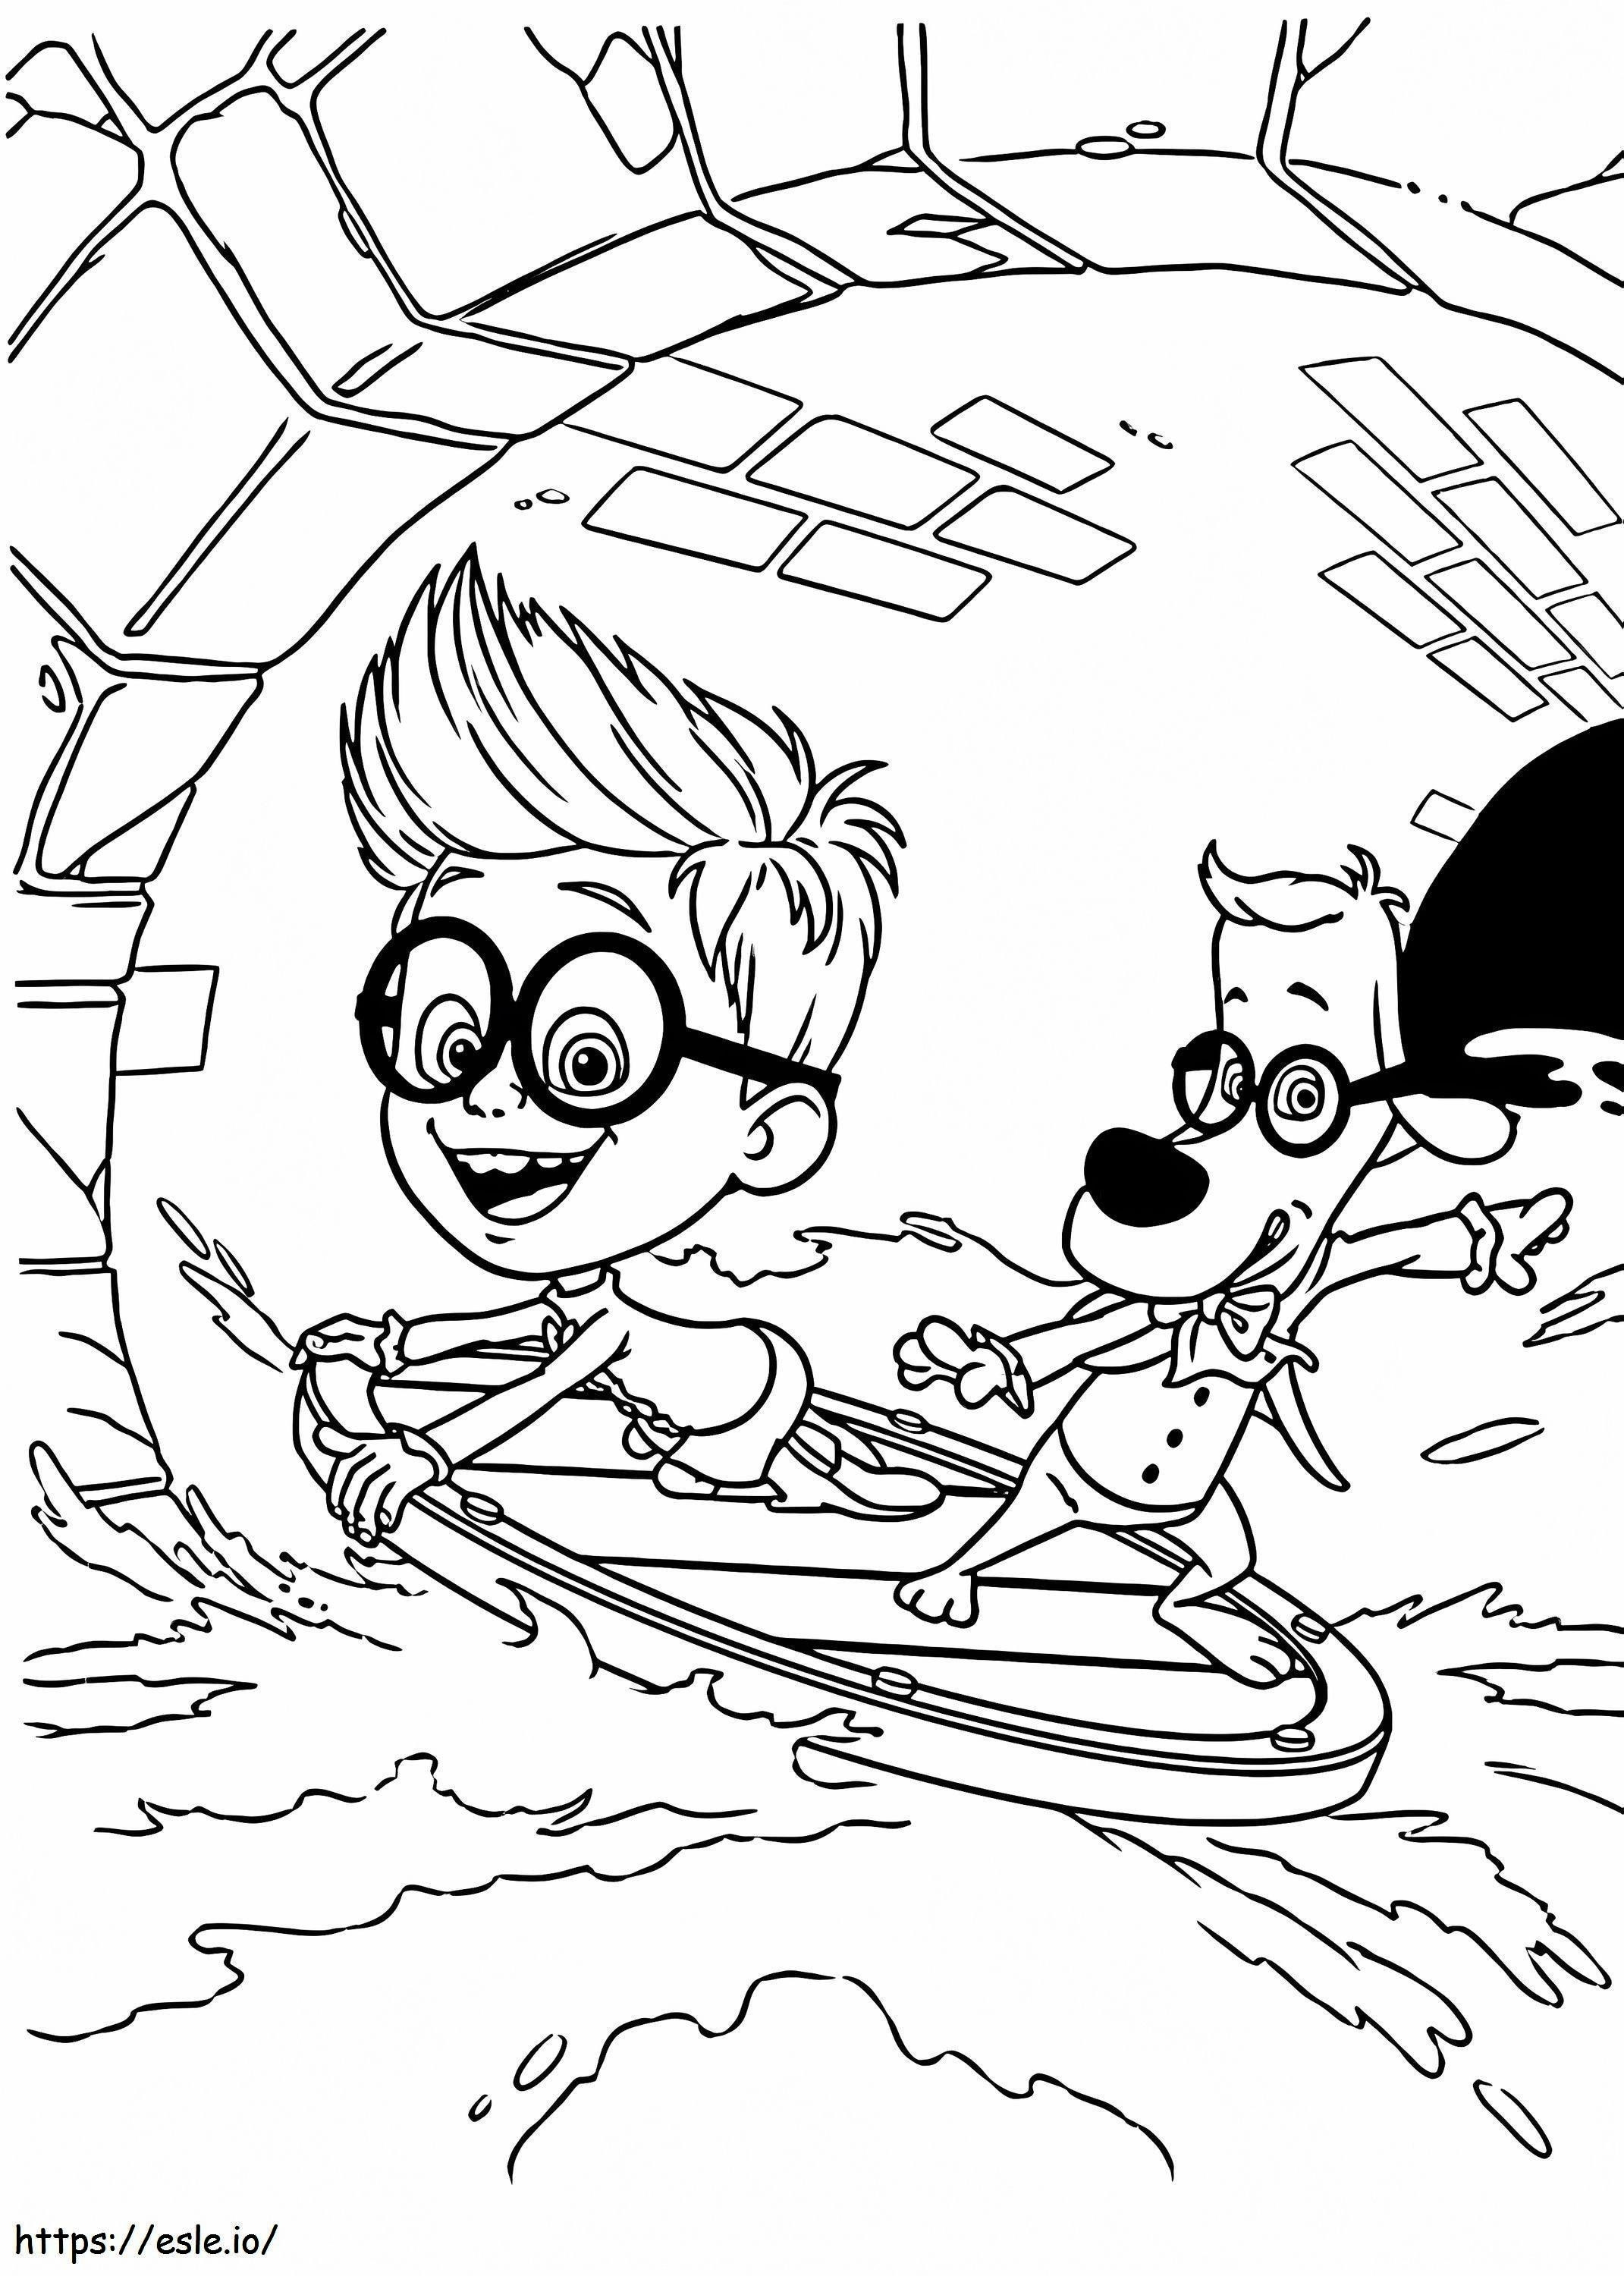 Mr. Peabody And Sherman 4 coloring page